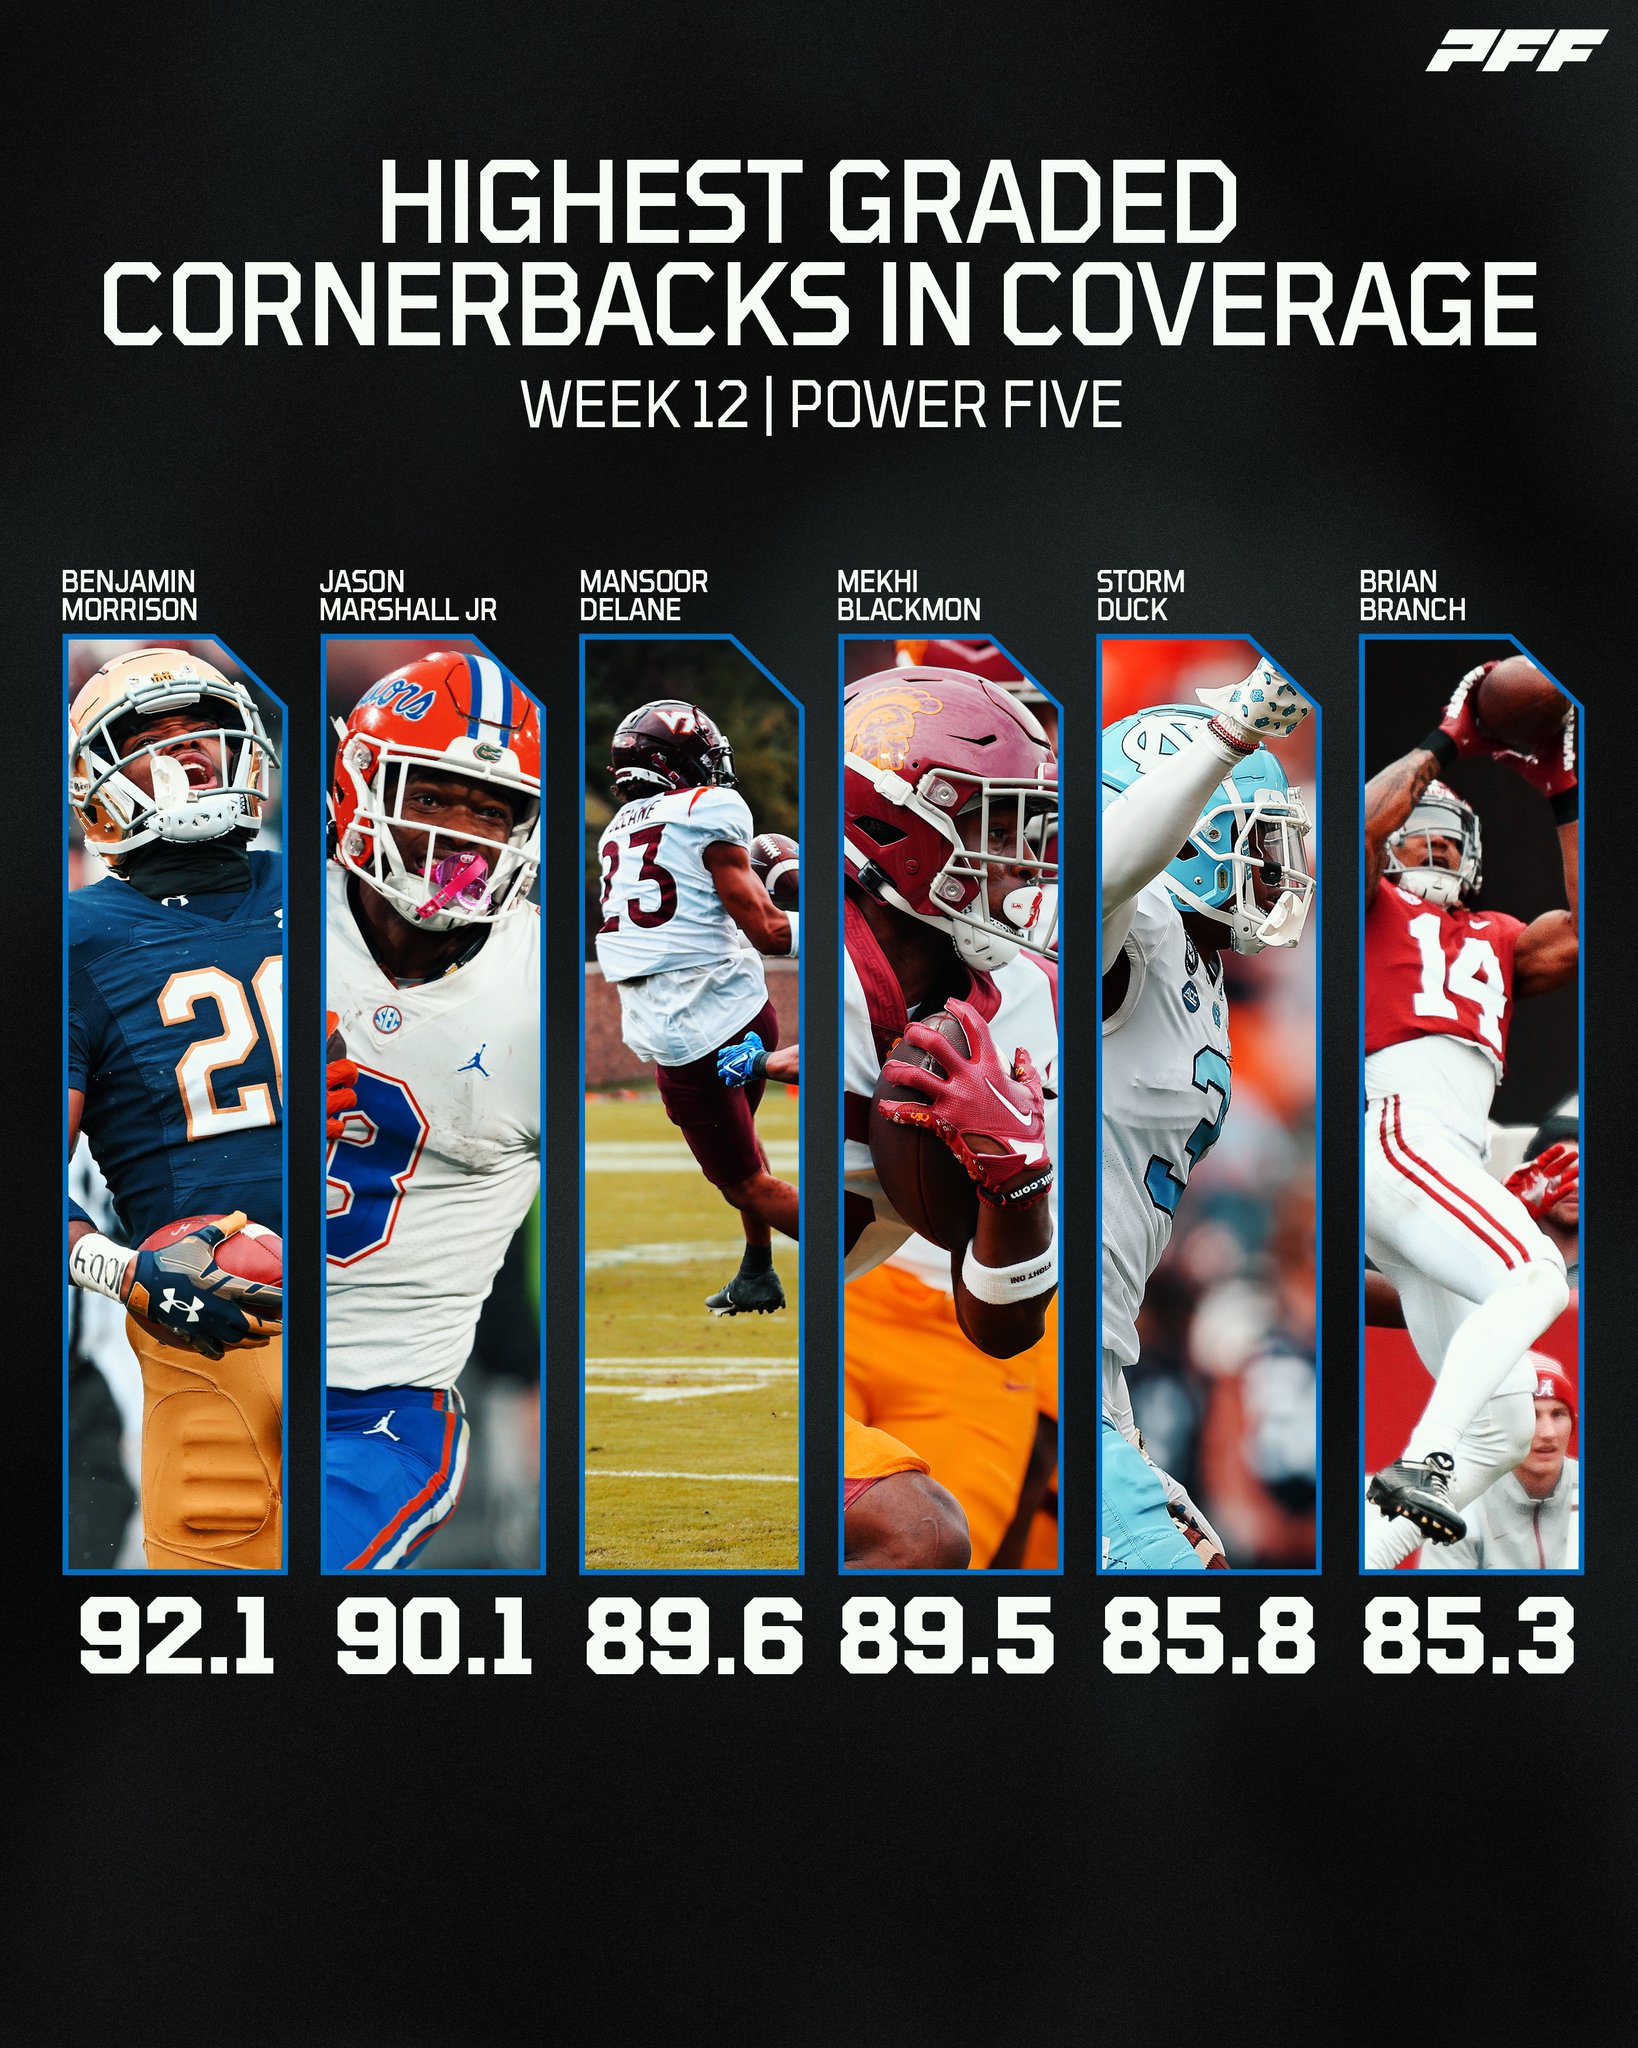 PFF College on Twitter "Top Cornerbacks in coverage from Week 12🔒